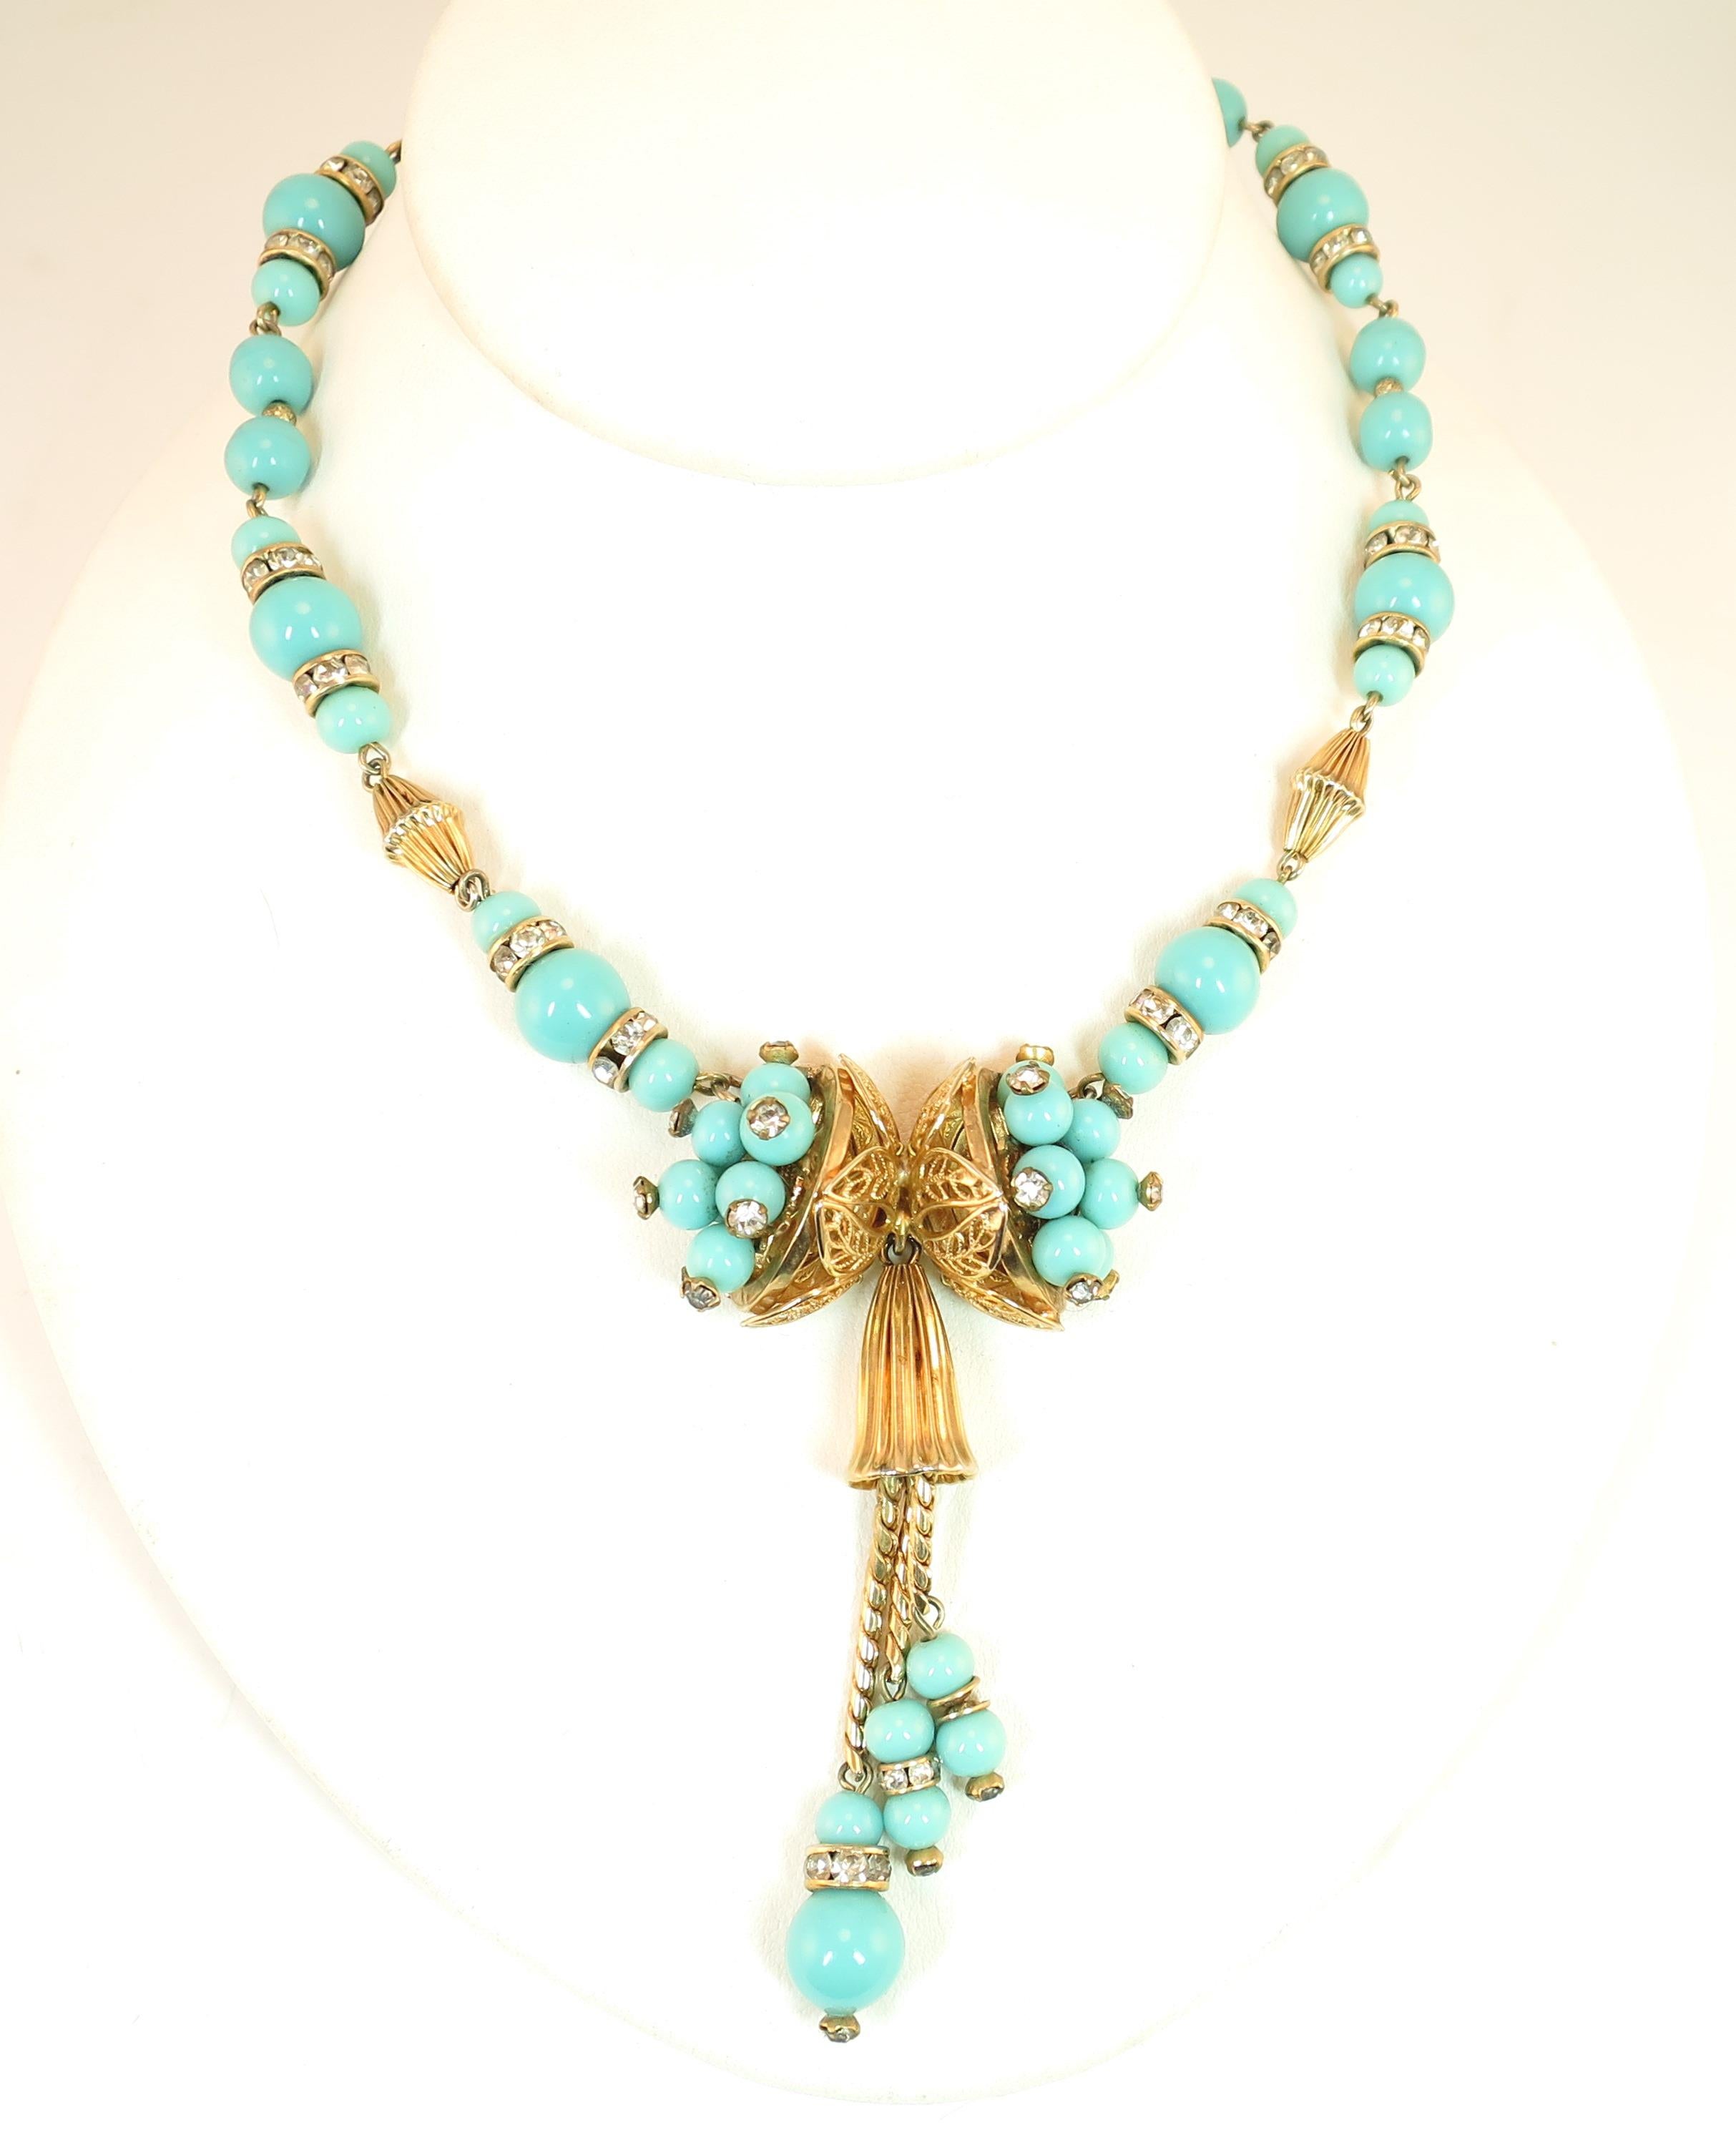 Offered here is a Miriam Haskell turquoise glass gold-plated necklace and bracelet set, made in Germany in the 1950s. The components for both pieces are alike, but the design expression for each item is its own, within the theme. The necklace has a